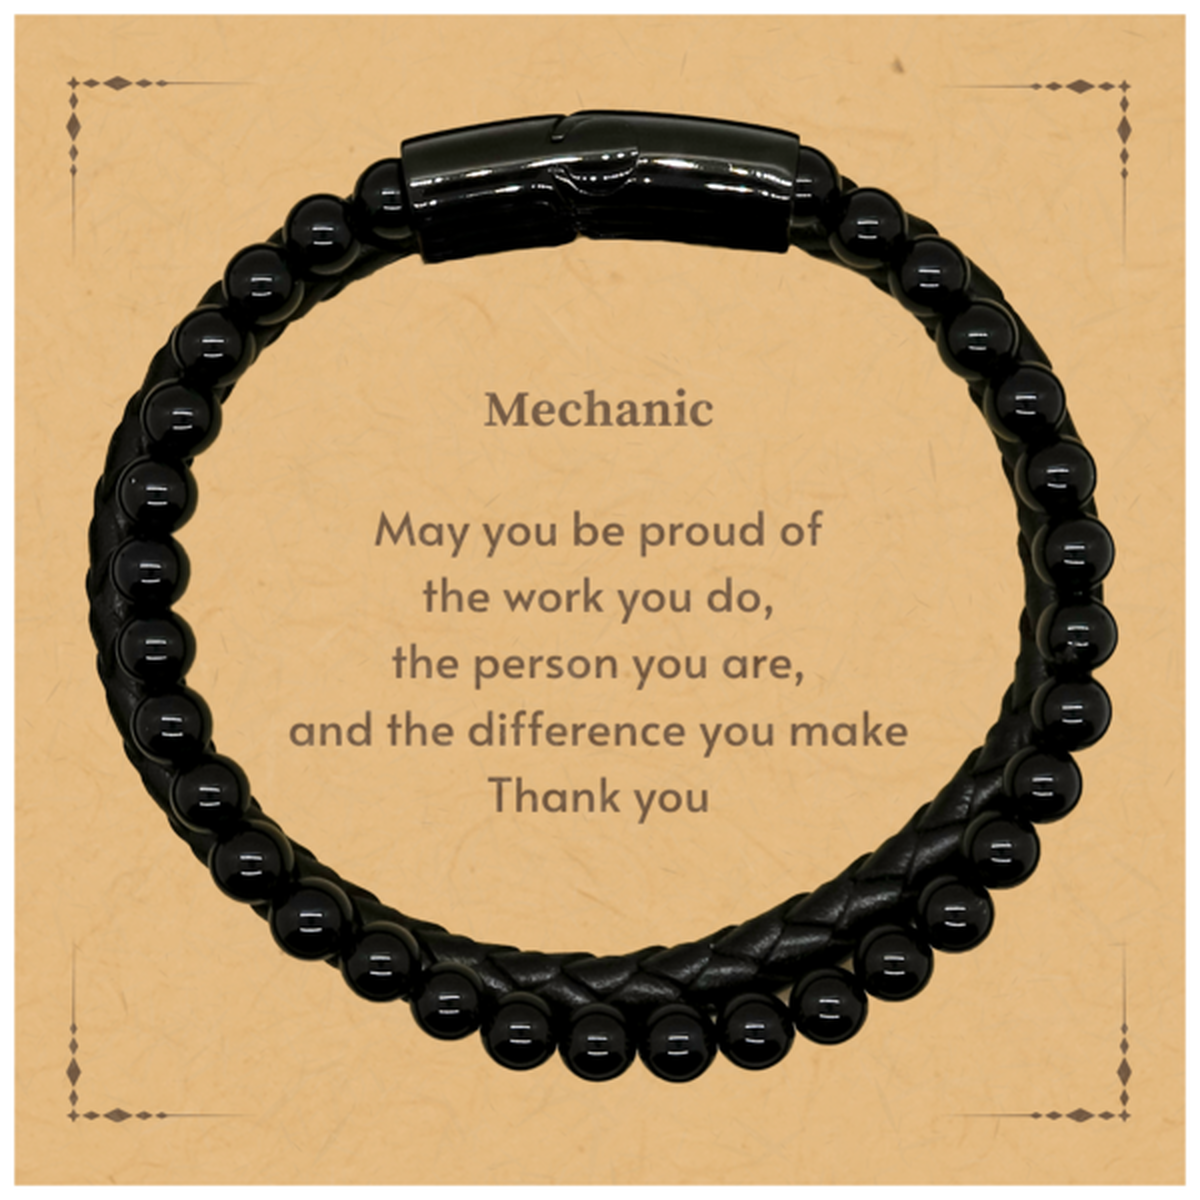 Heartwarming Stone Leather Bracelets Retirement Coworkers Gifts for Mechanic, Mechanic May You be proud of the work you do, the person you are Gifts for Boss Men Women Friends